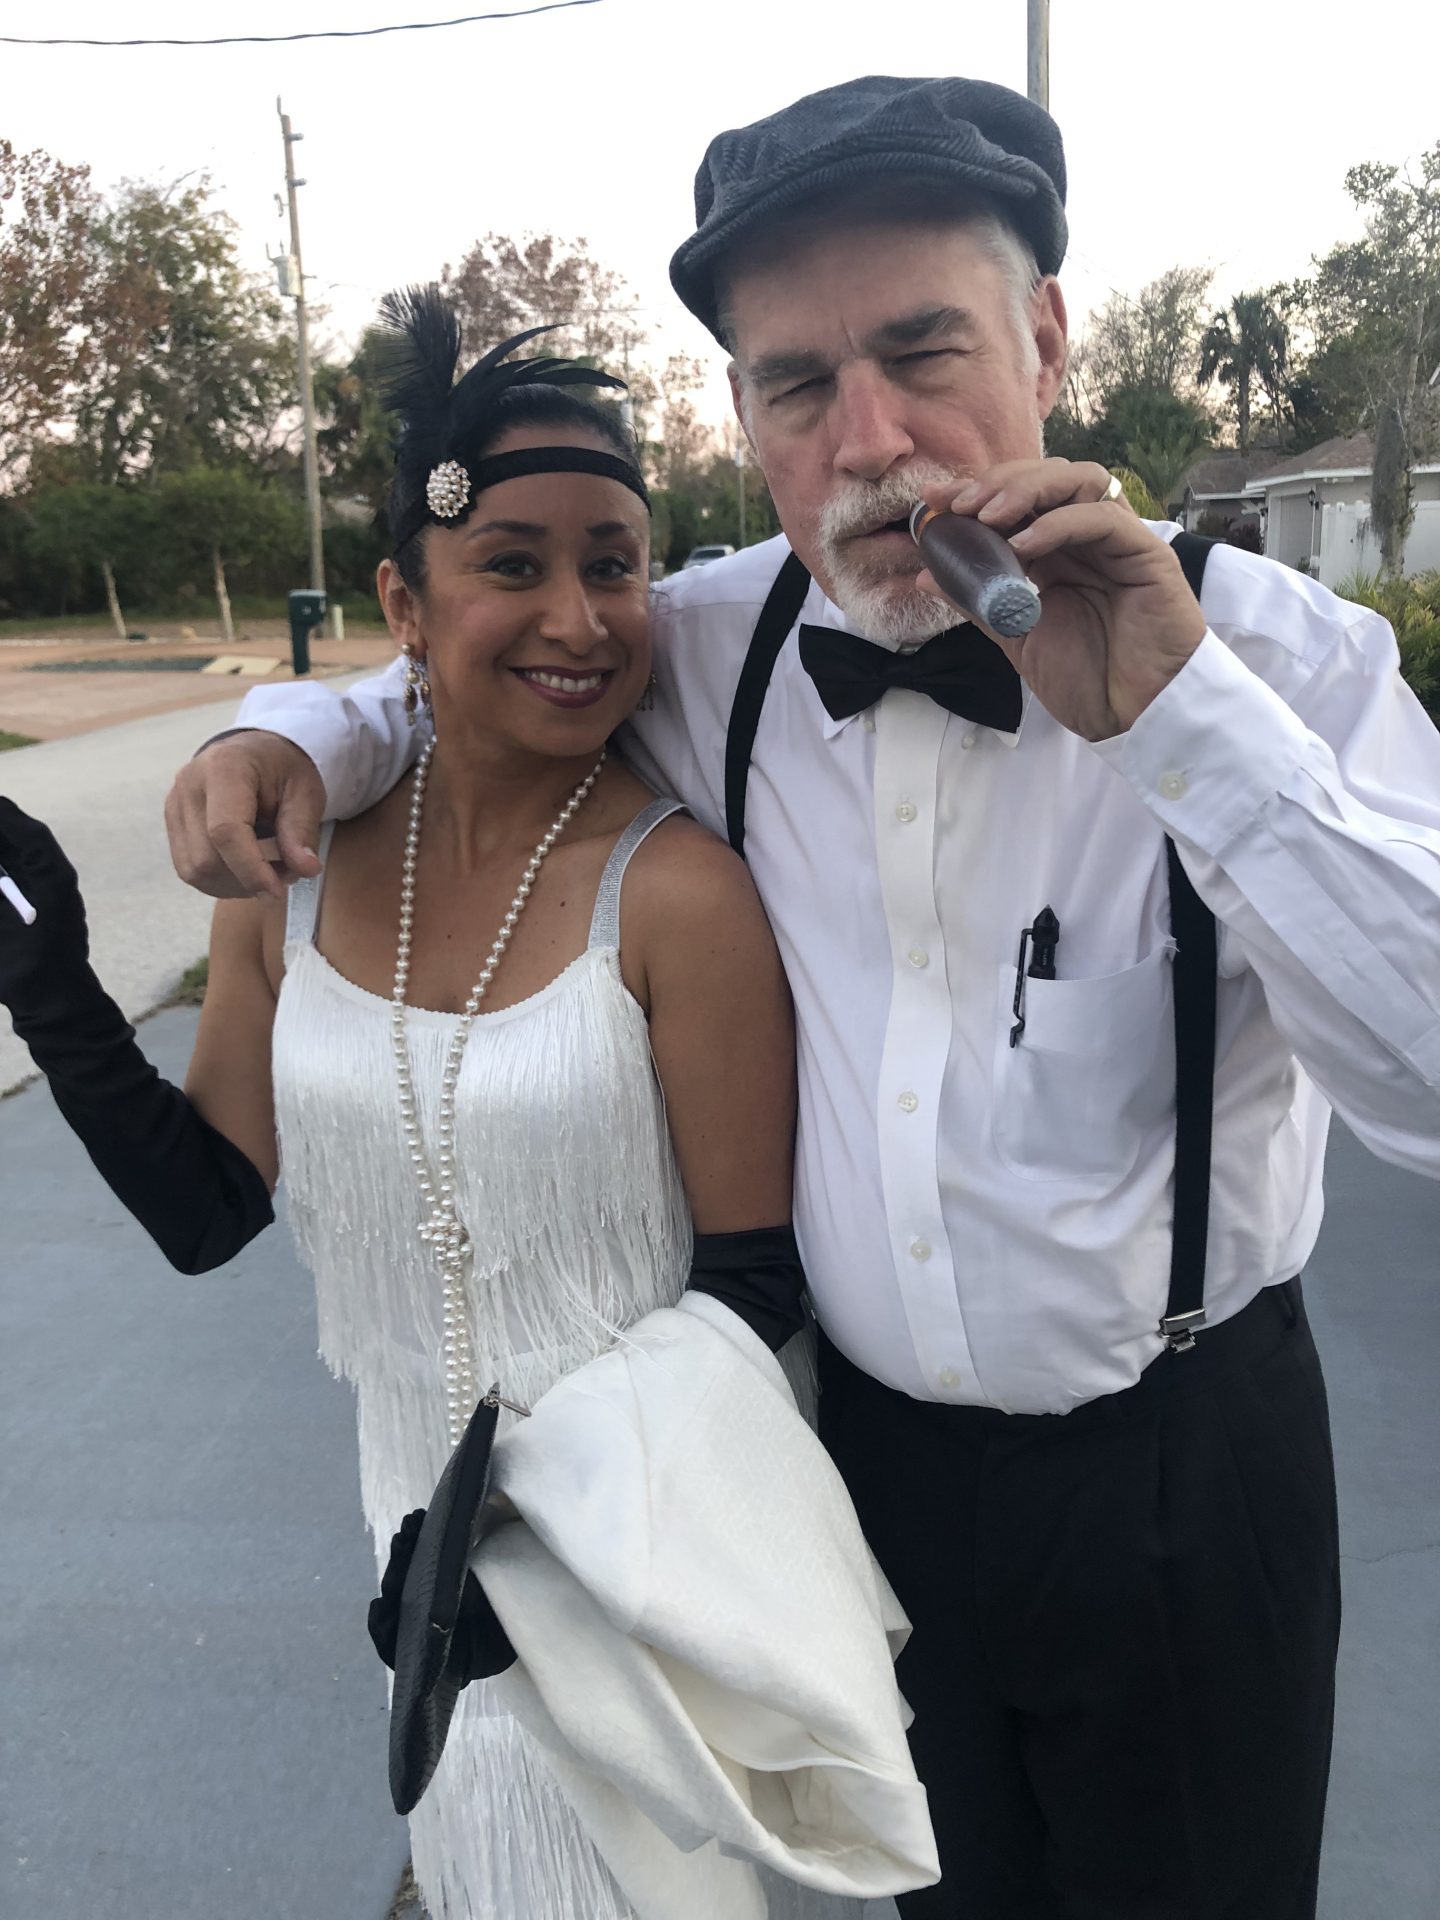 Tom and Jessica,<br />
1920's business party at the Hammocks, Palm Coast.